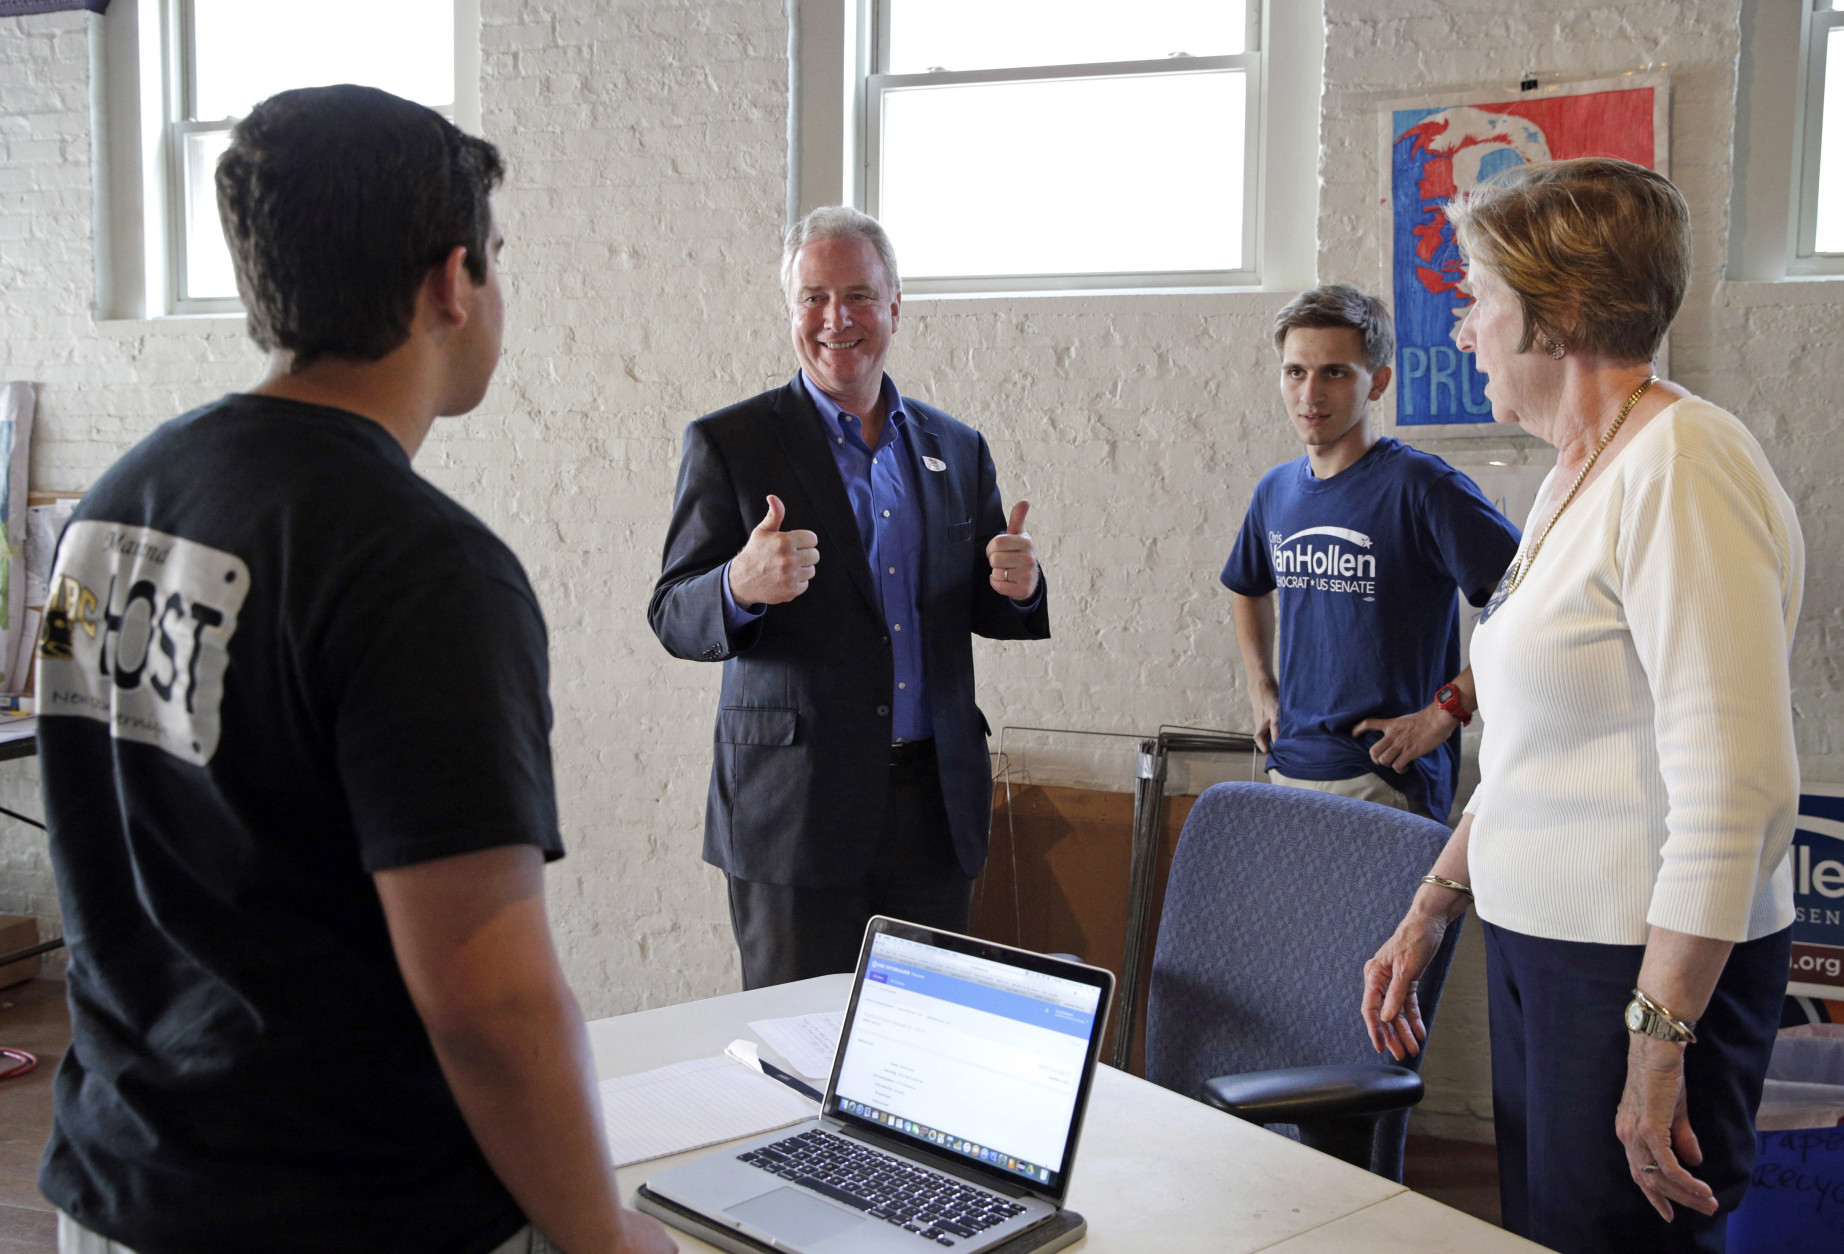 Democratic U.S. Senate candidate, Rep. Chris Van Hollen, D-Md., second from left, greets volunteers inside his field office in Baltimore, Tuesday, April 26, 2016. Van Hollen is running against Rep. Donna Edwards, D-Md., in the Democratic primary for U.S. Senate. (AP Photo/Patrick Semansky)